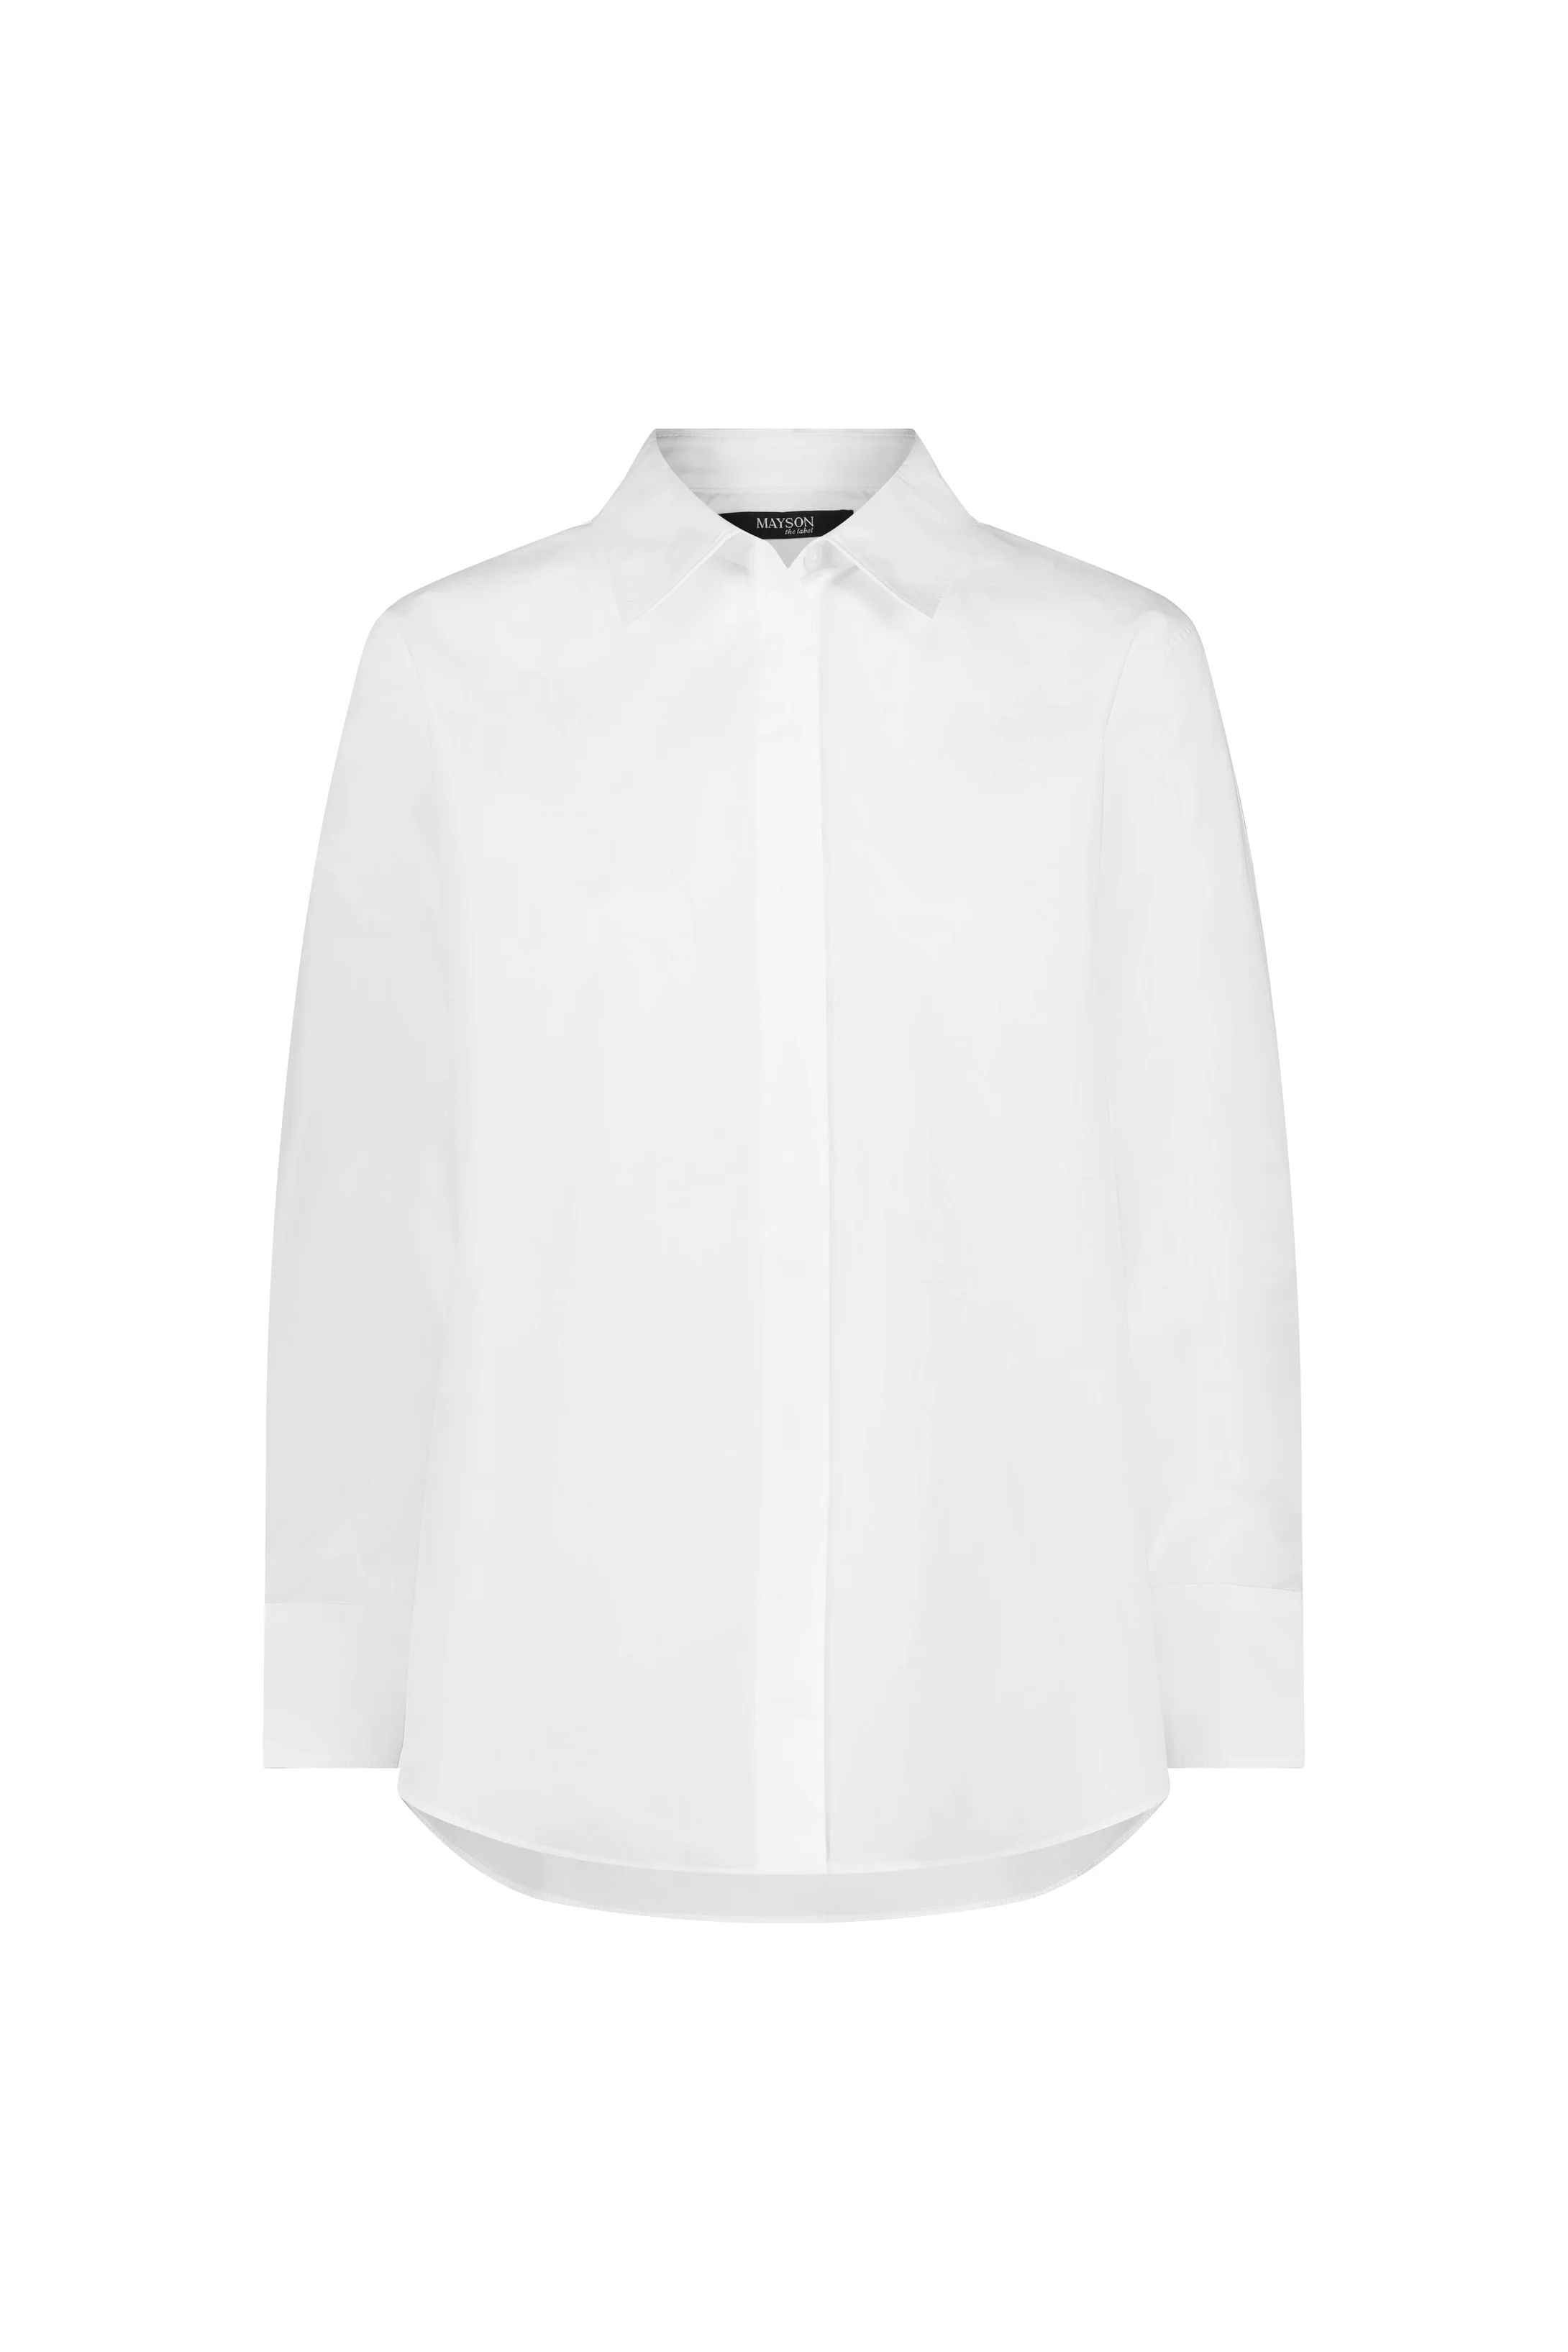 Classic Button Up Shirt | MAYSON the label